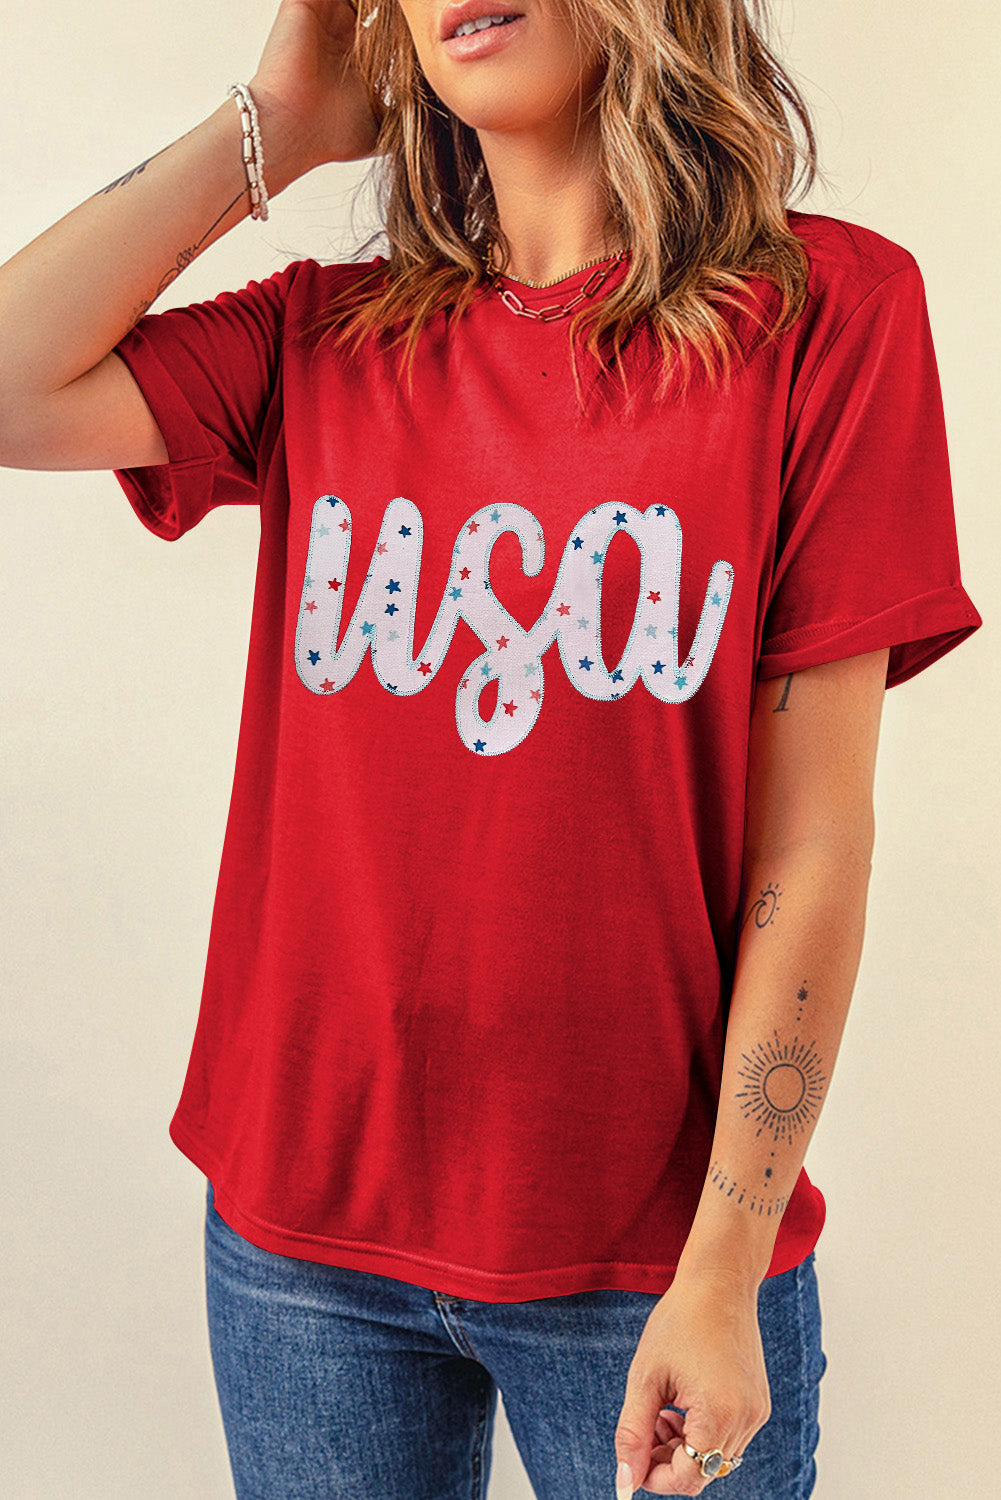 Red Starry usa Graphic Crewneck T Shirt Graphic Tees JT's Designer Fashion